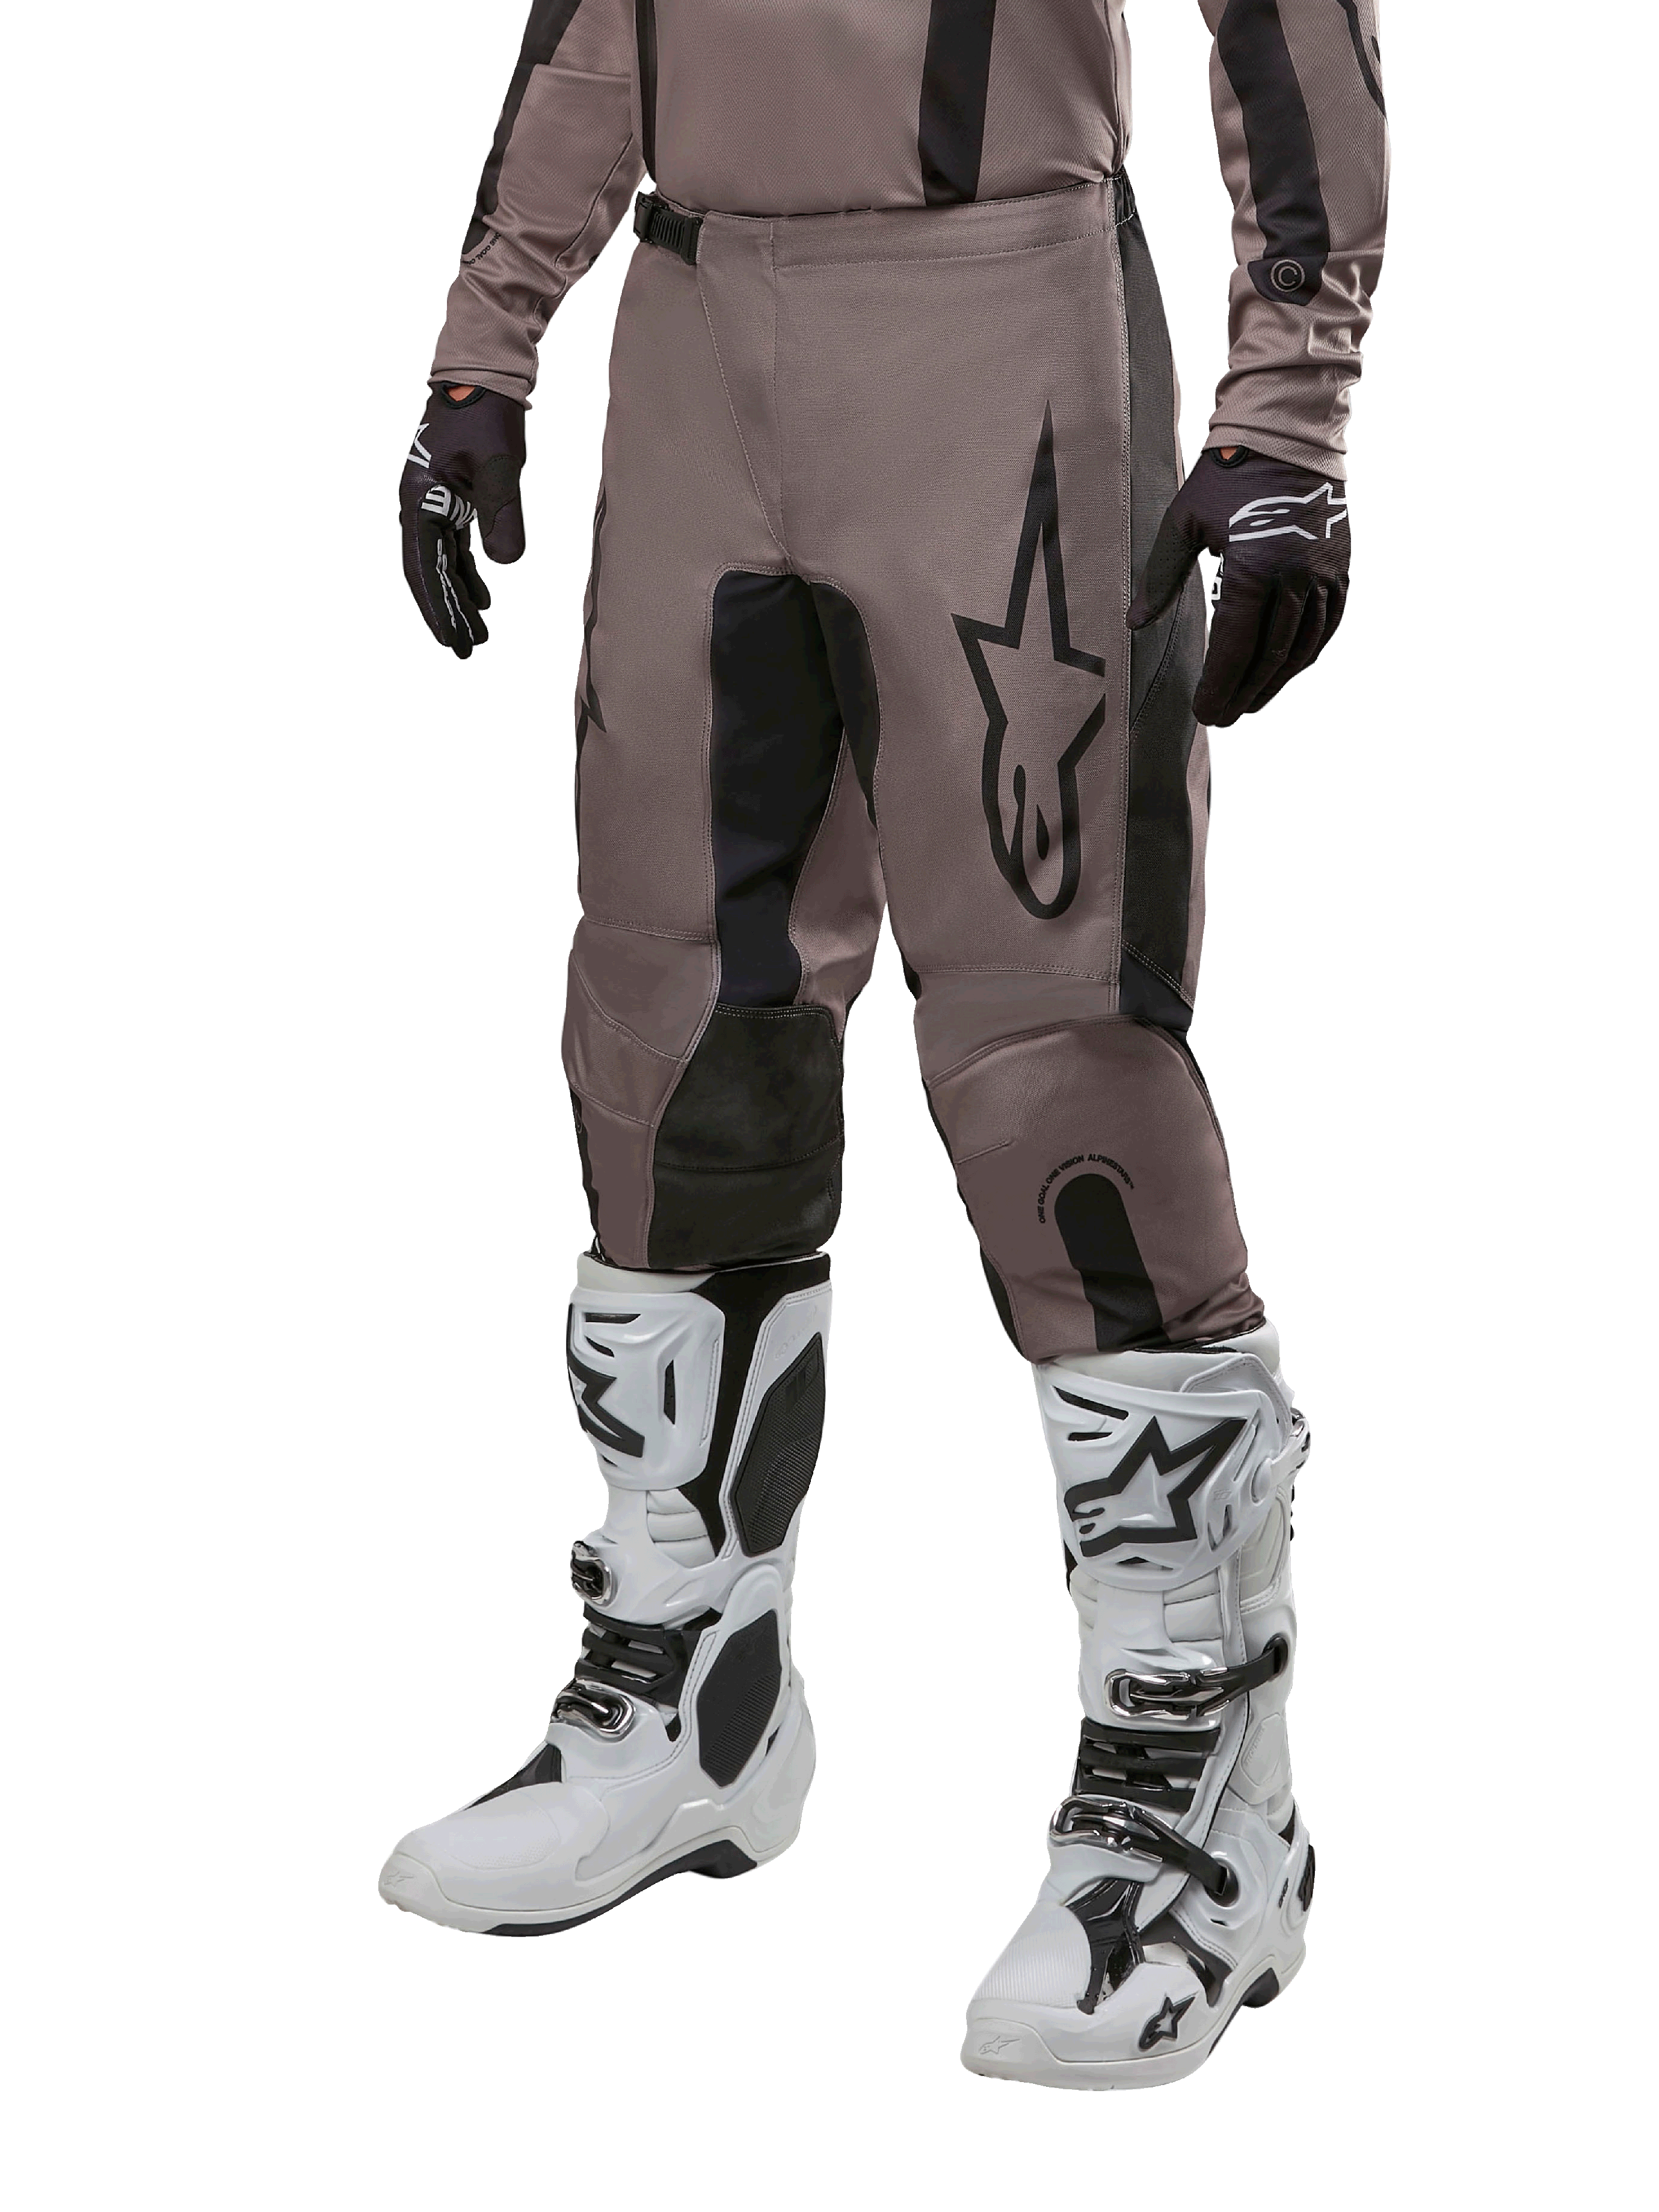 $119.95 Fly Racing Mens Overboot MX Pants #1061984